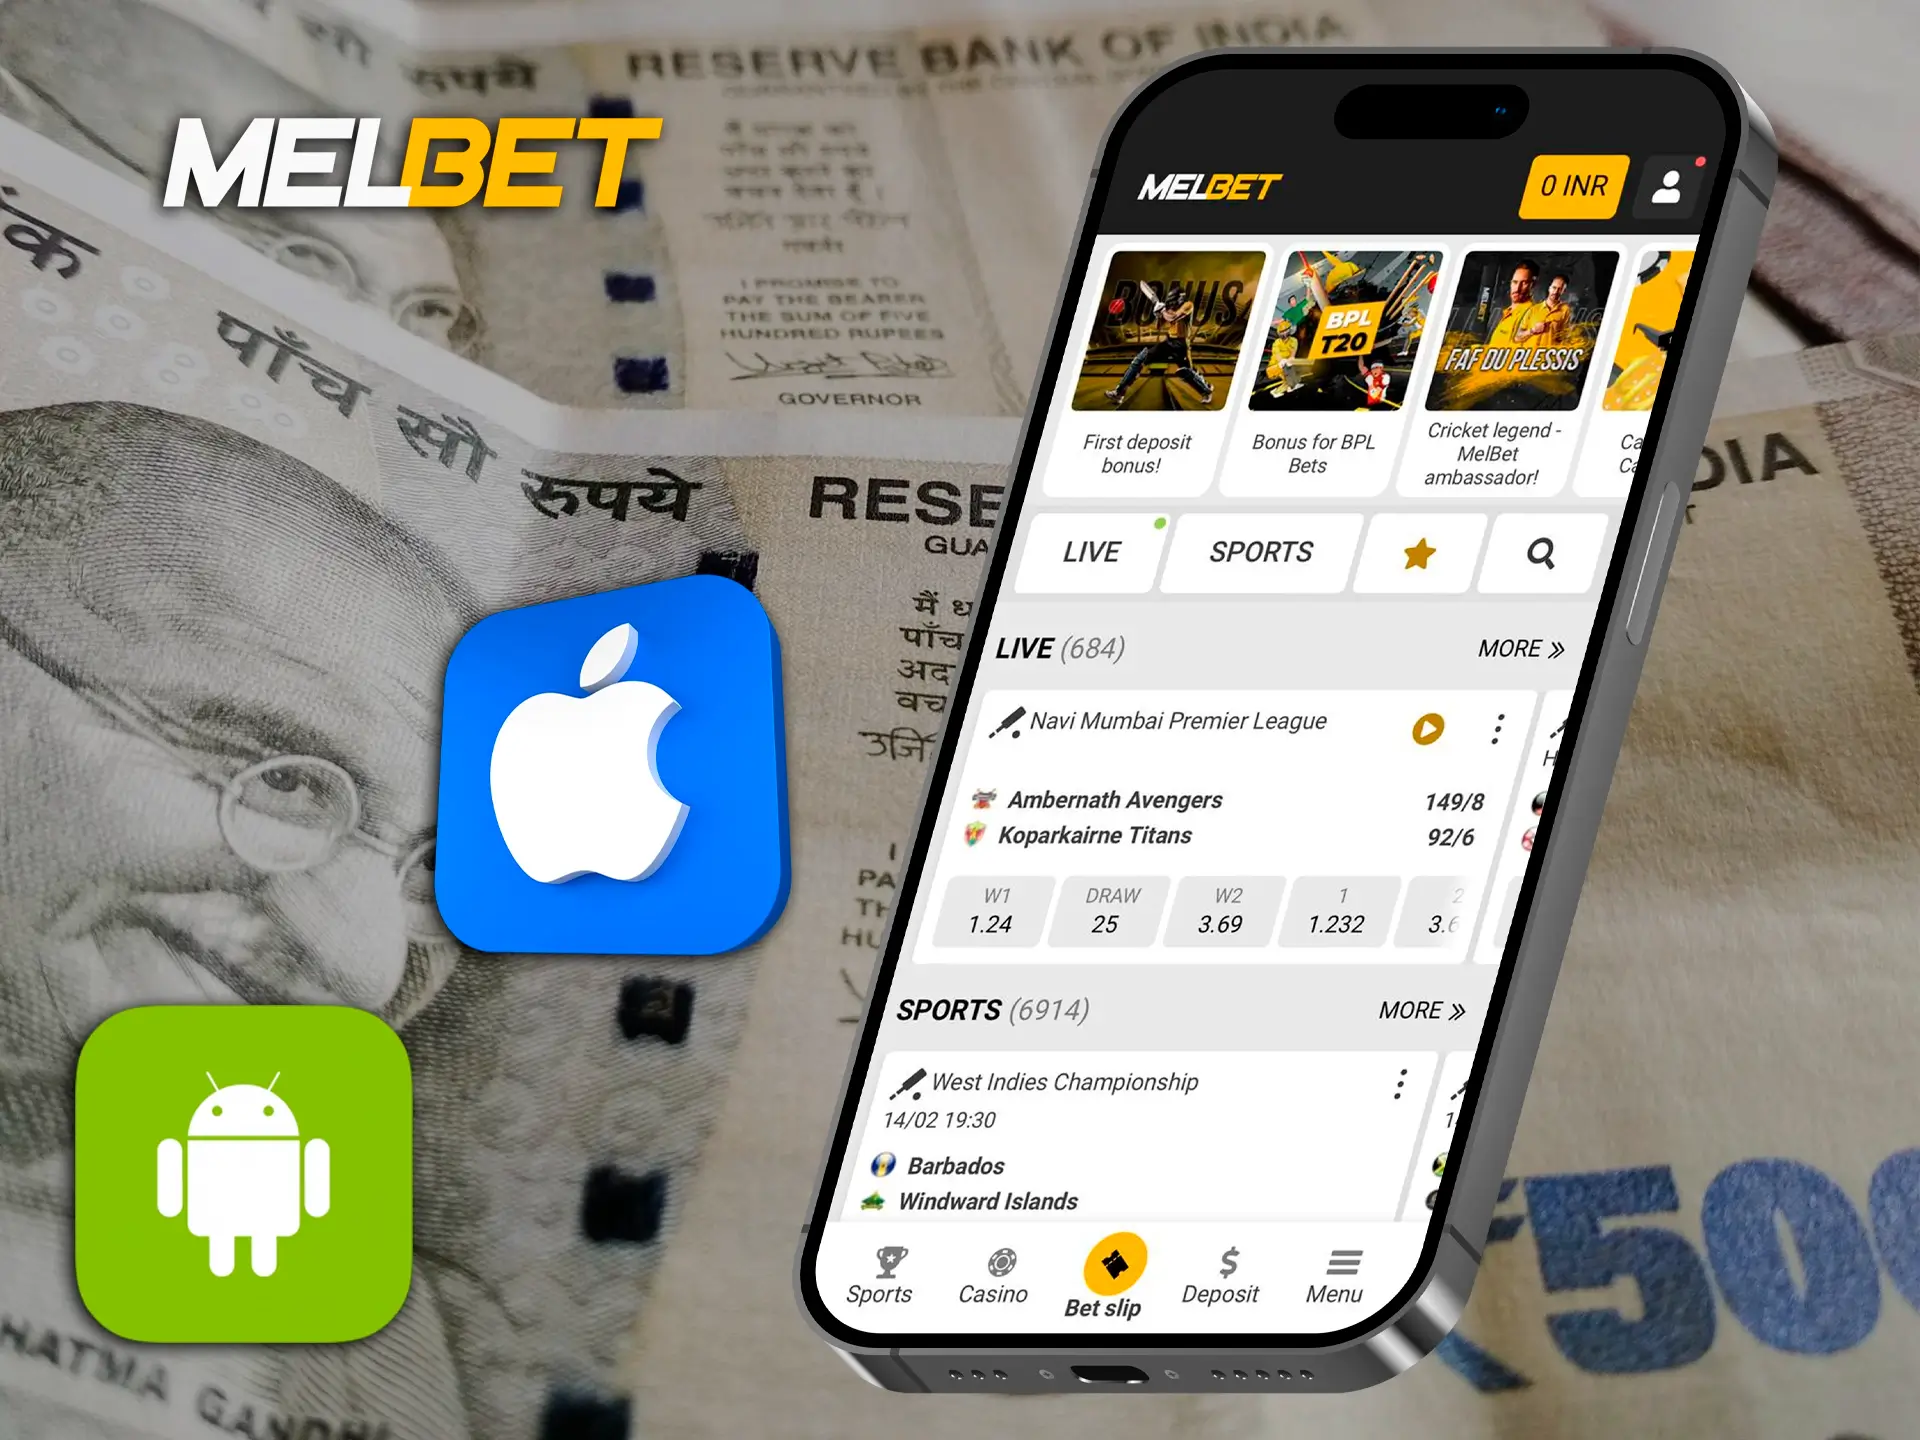 The ios and android version of the Melbet app has an instant withdrawal feature.